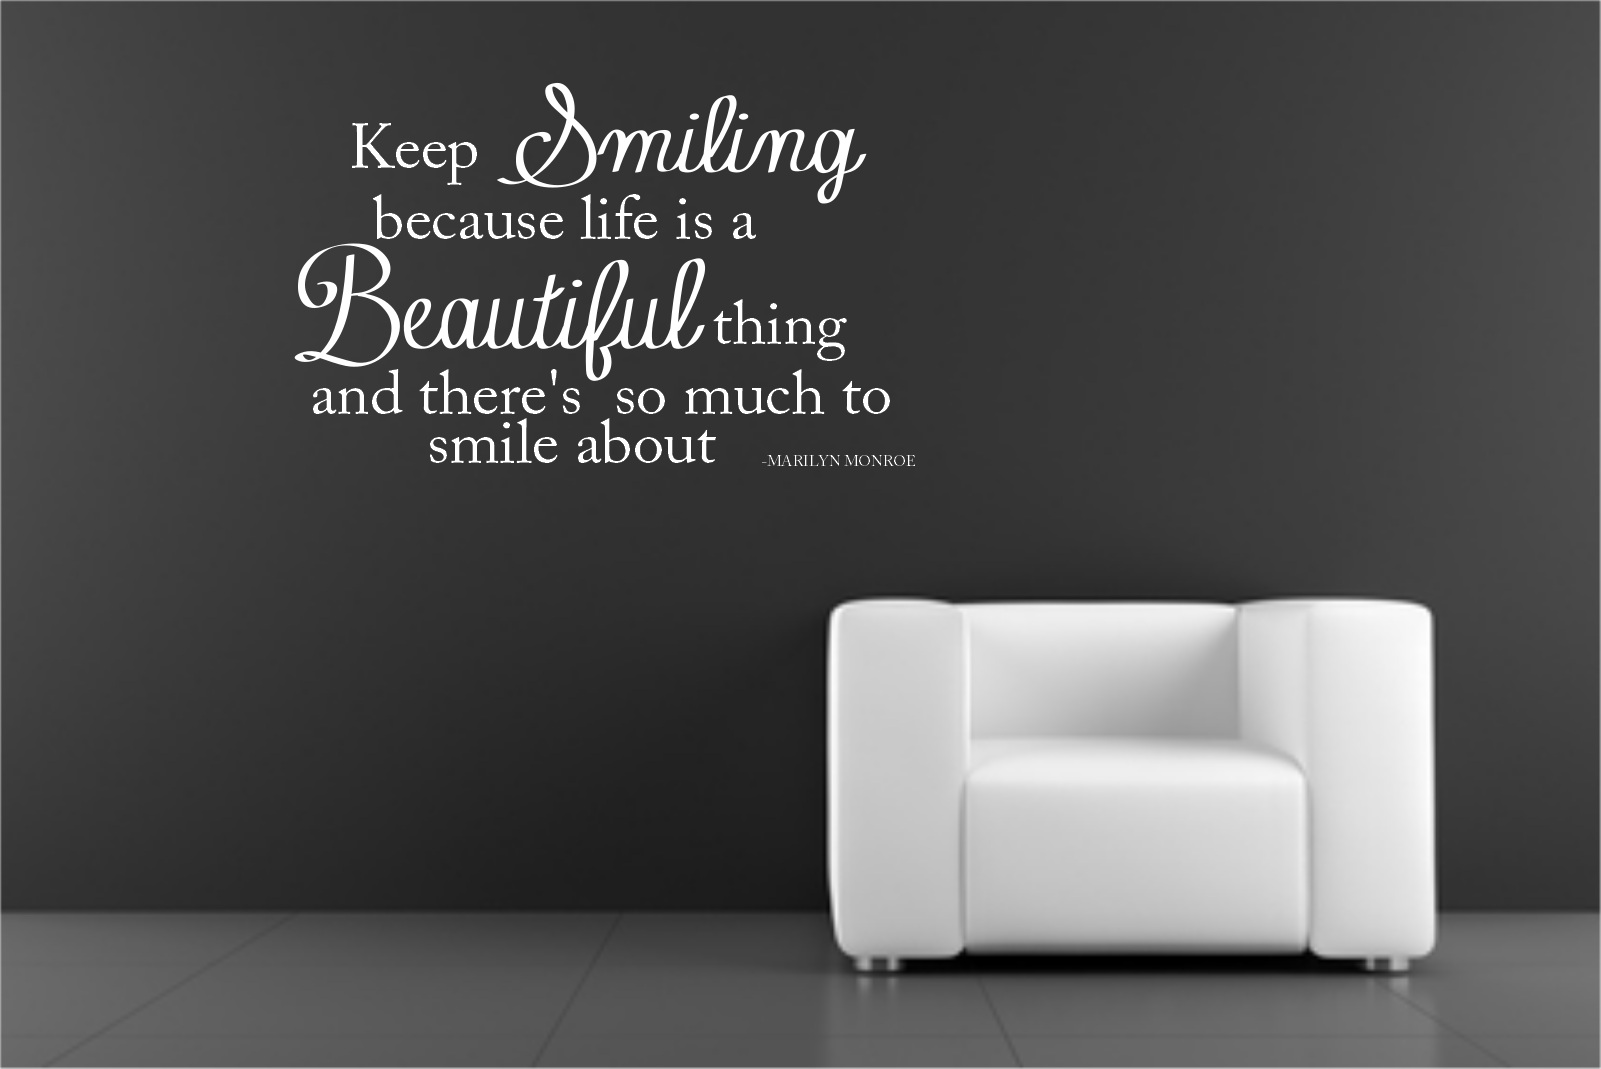 smile-quotes-keep-smiling-marilyn-monroe-quote